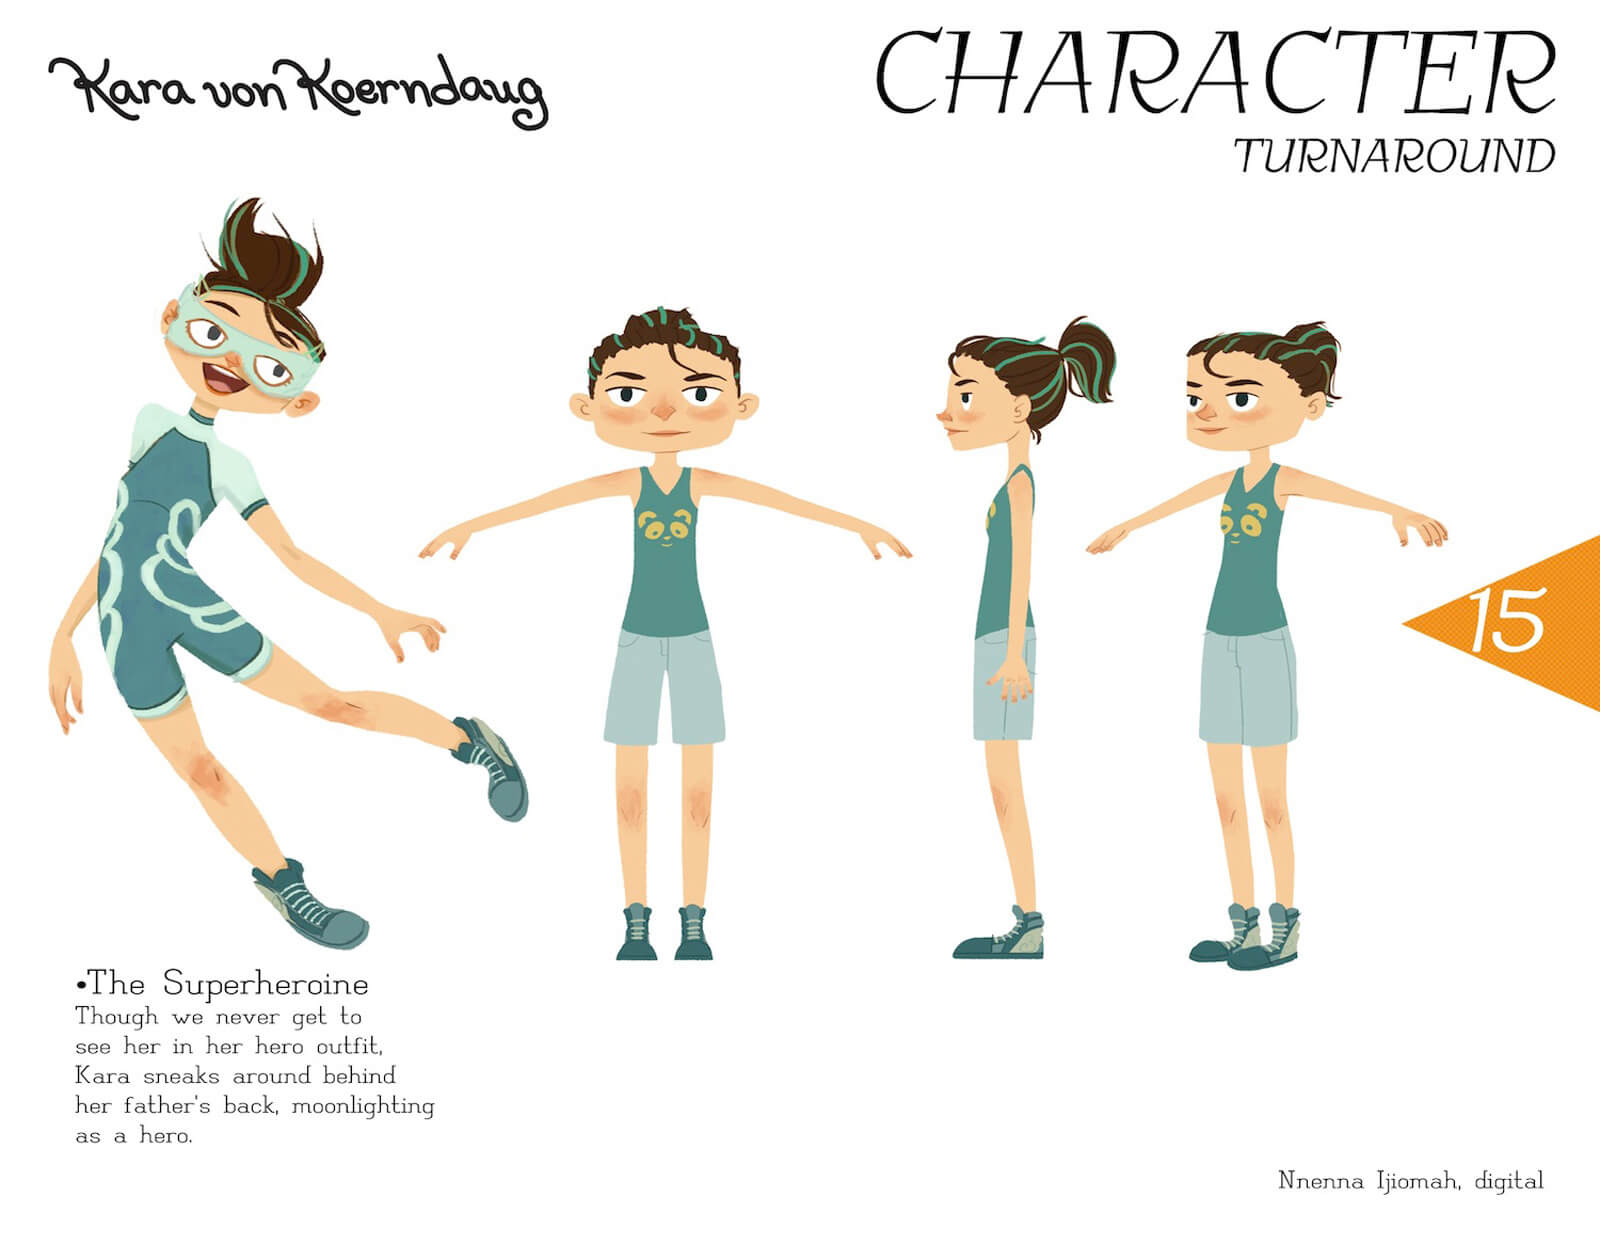 Character turnaround slide for Kara von Koerndaug, showing model from different angles and in superheroine dress